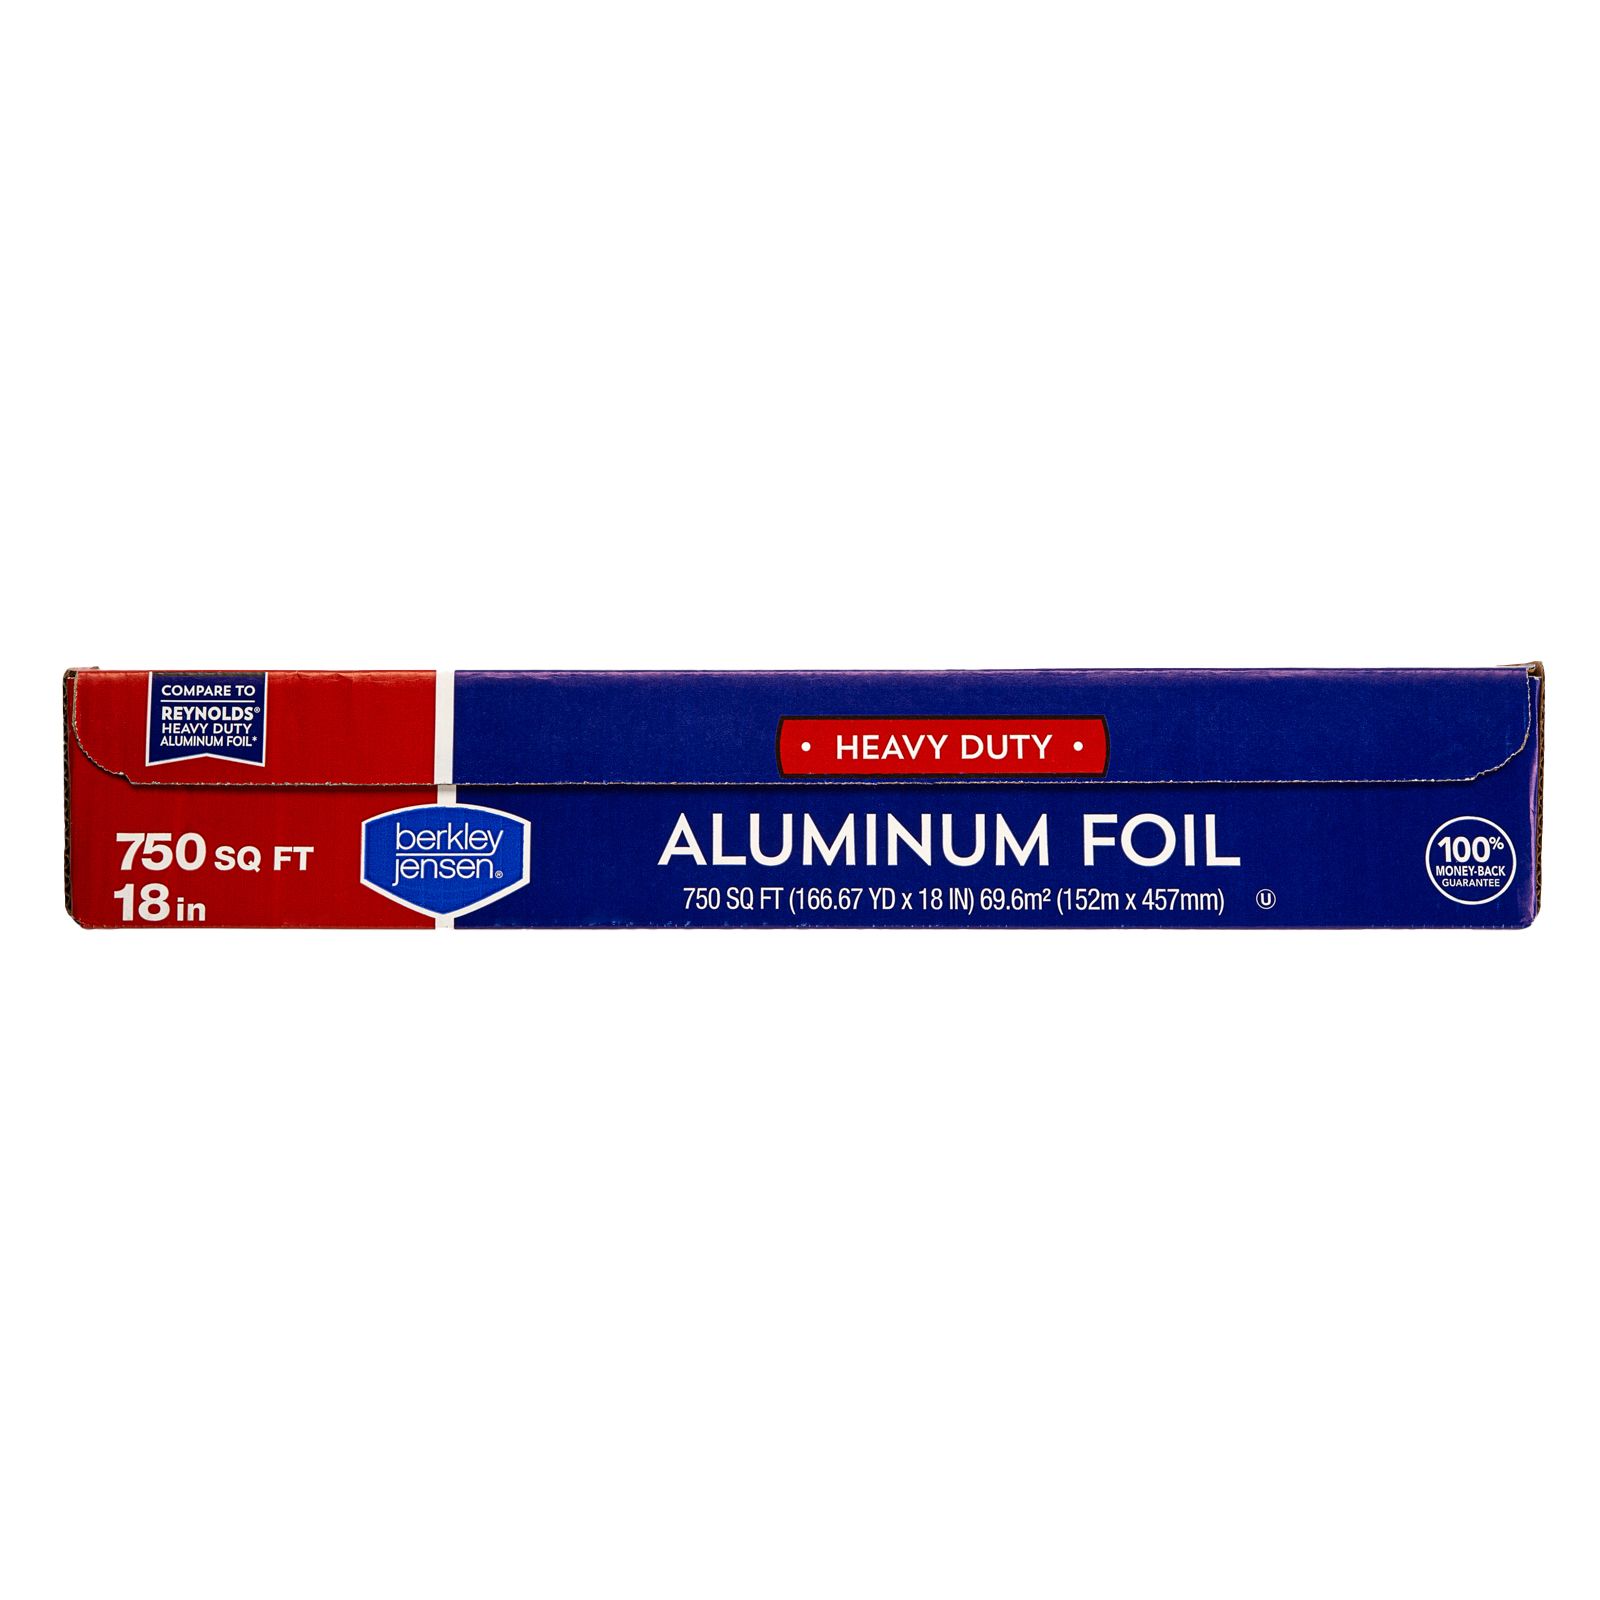 The Difference Between Regular and Heavy-Duty Aluminum Foil